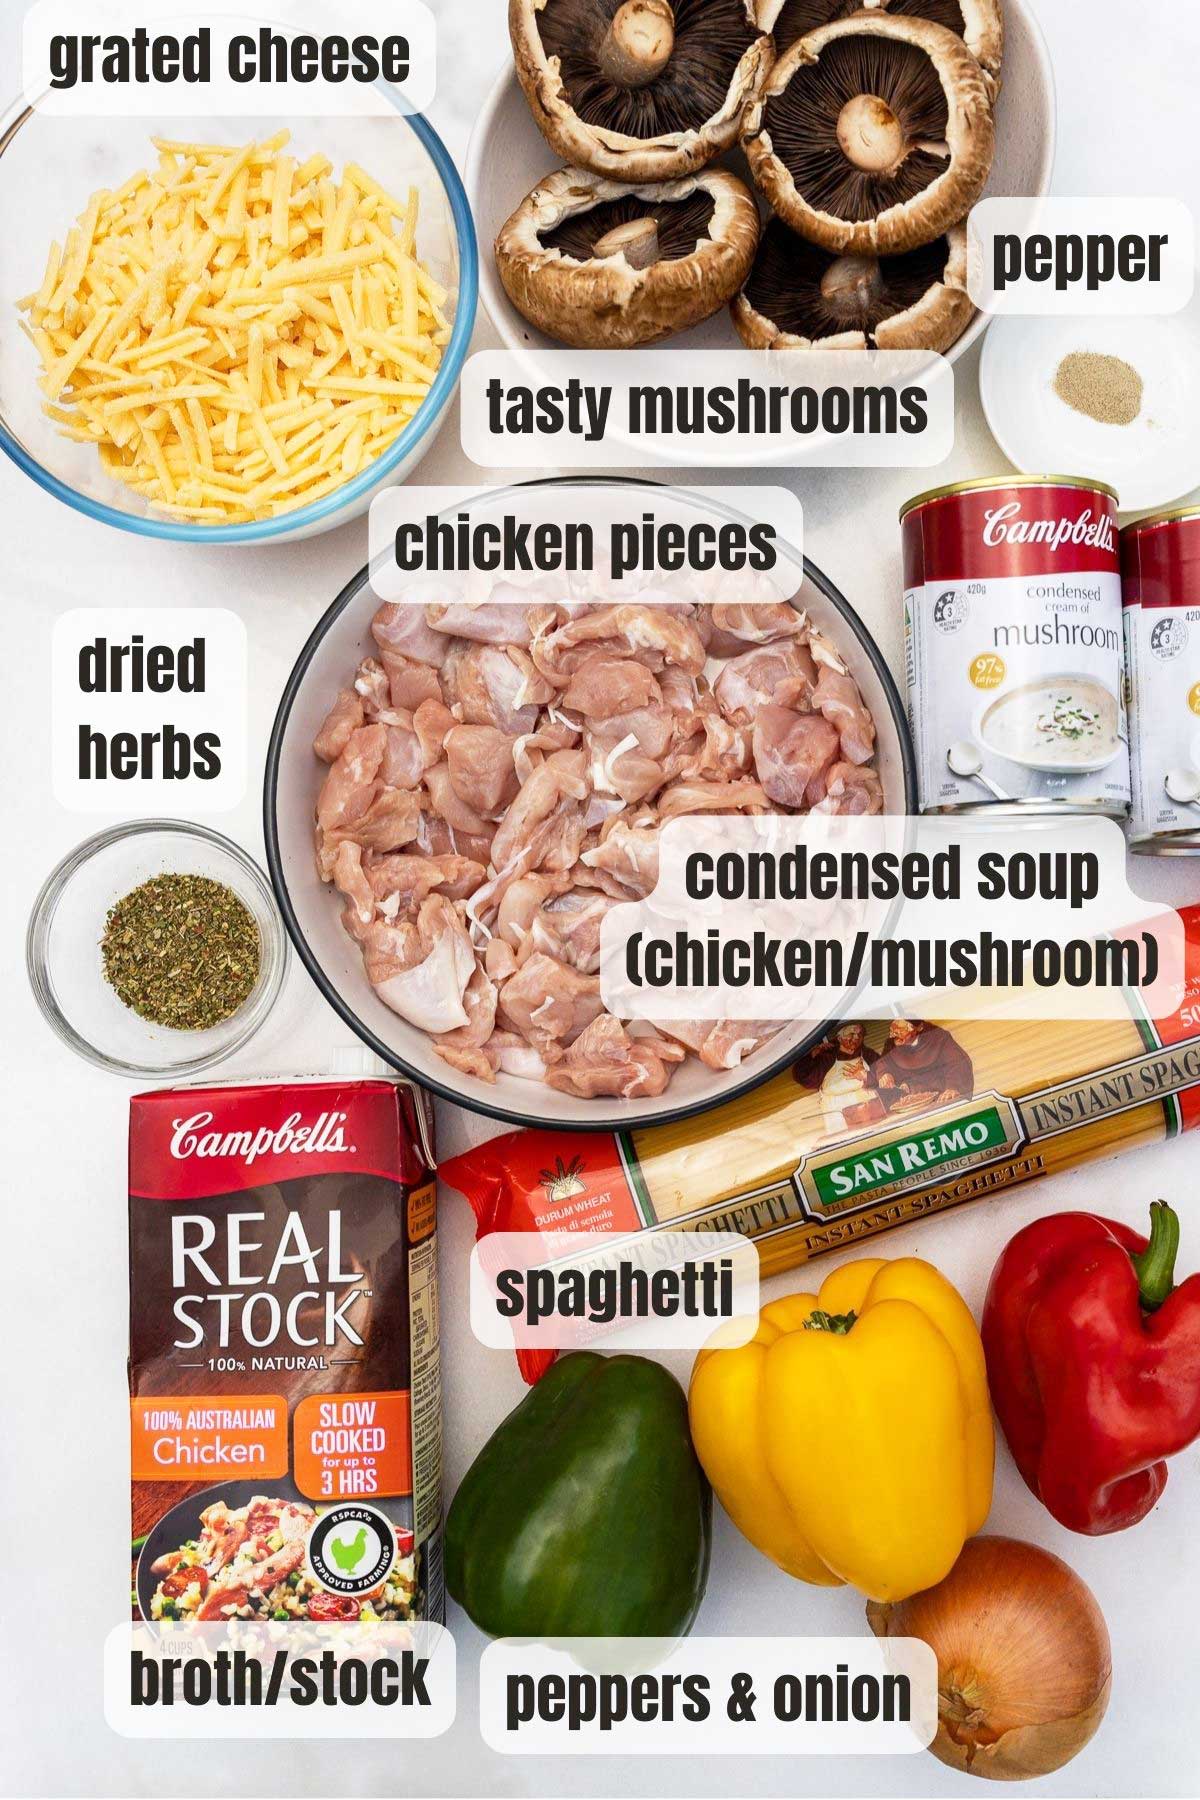 Overhead image of all the ingredients needed for baked chicken spaghetti including chicken broth, chicken pieces, multi-colored peppers and an onion, condensed soup, dried herbs, mushrooms, pepper and grated cheese.